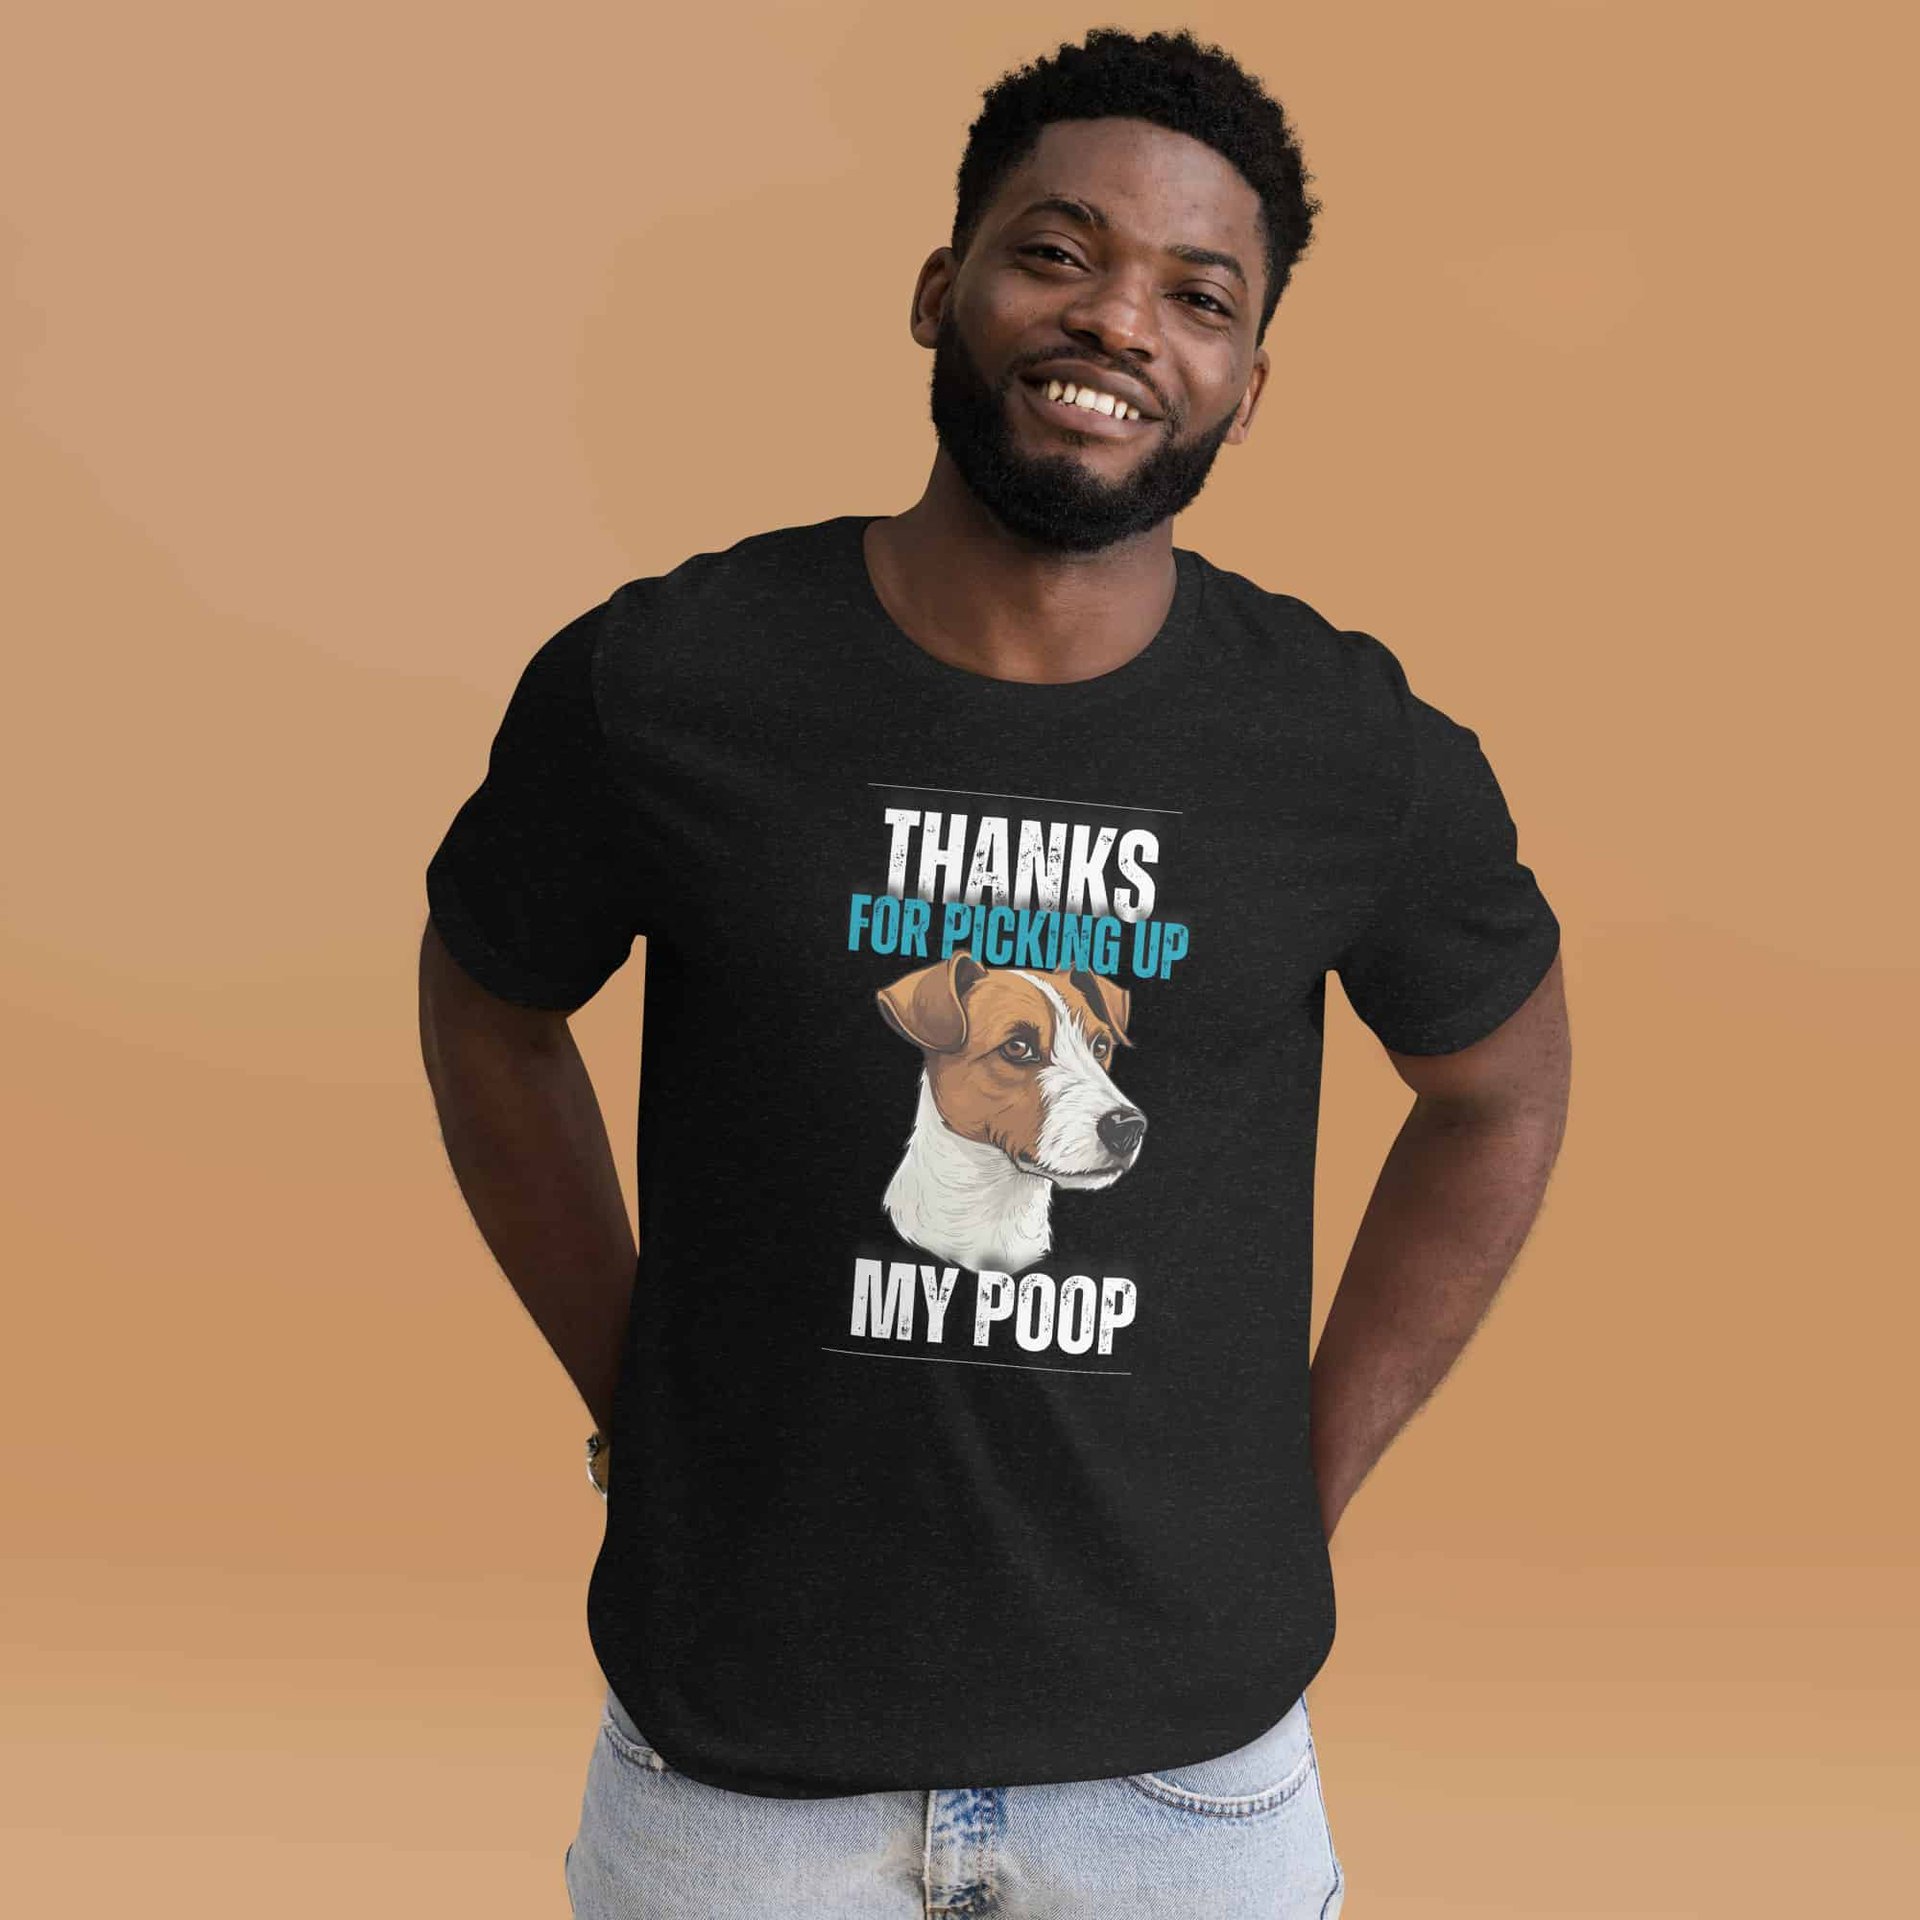 Thanks For Picking Up My POOP Funny Retrievers Unisex T-Shirt. Black Heather. Male